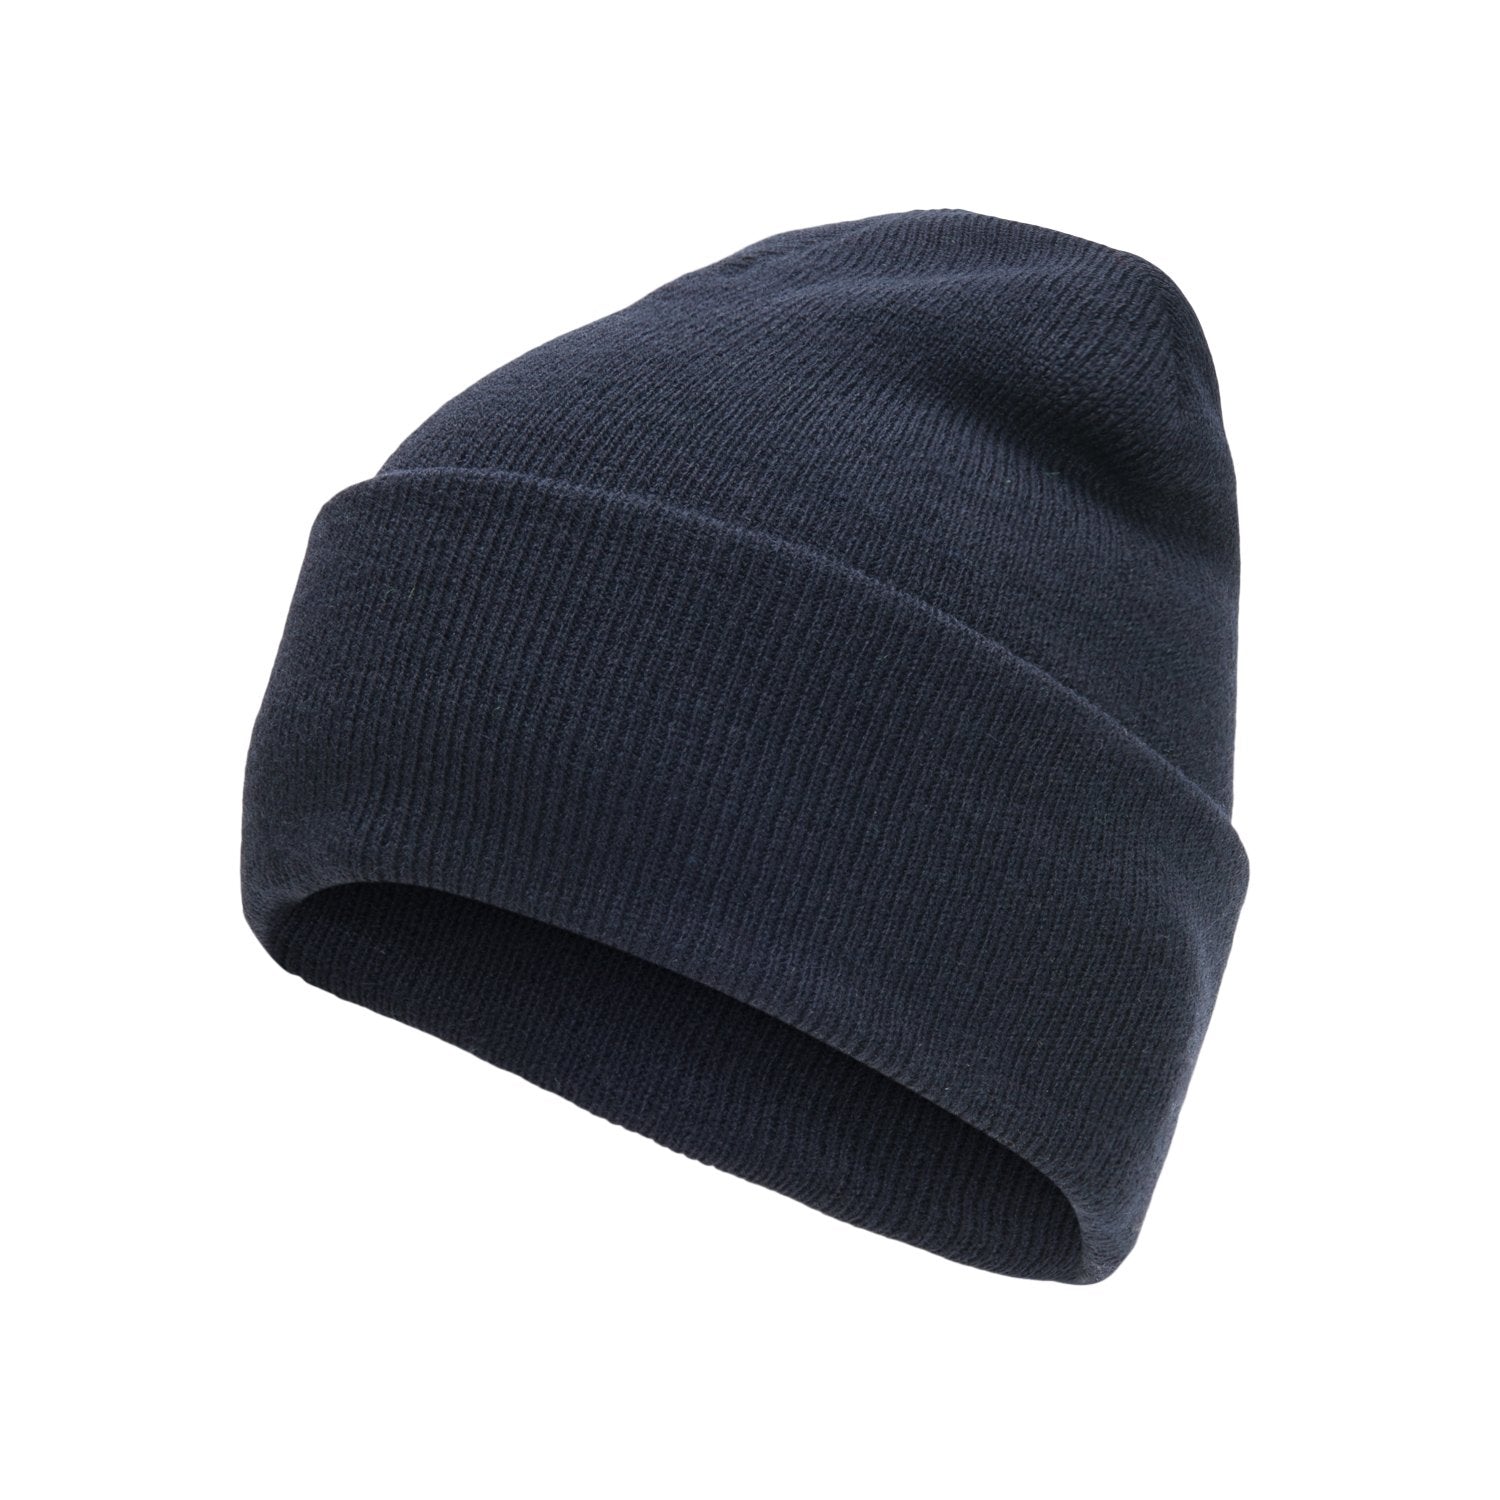 1017 Acrylic Hat - Navy II full product perspective - made in The USA Wigwam Socks